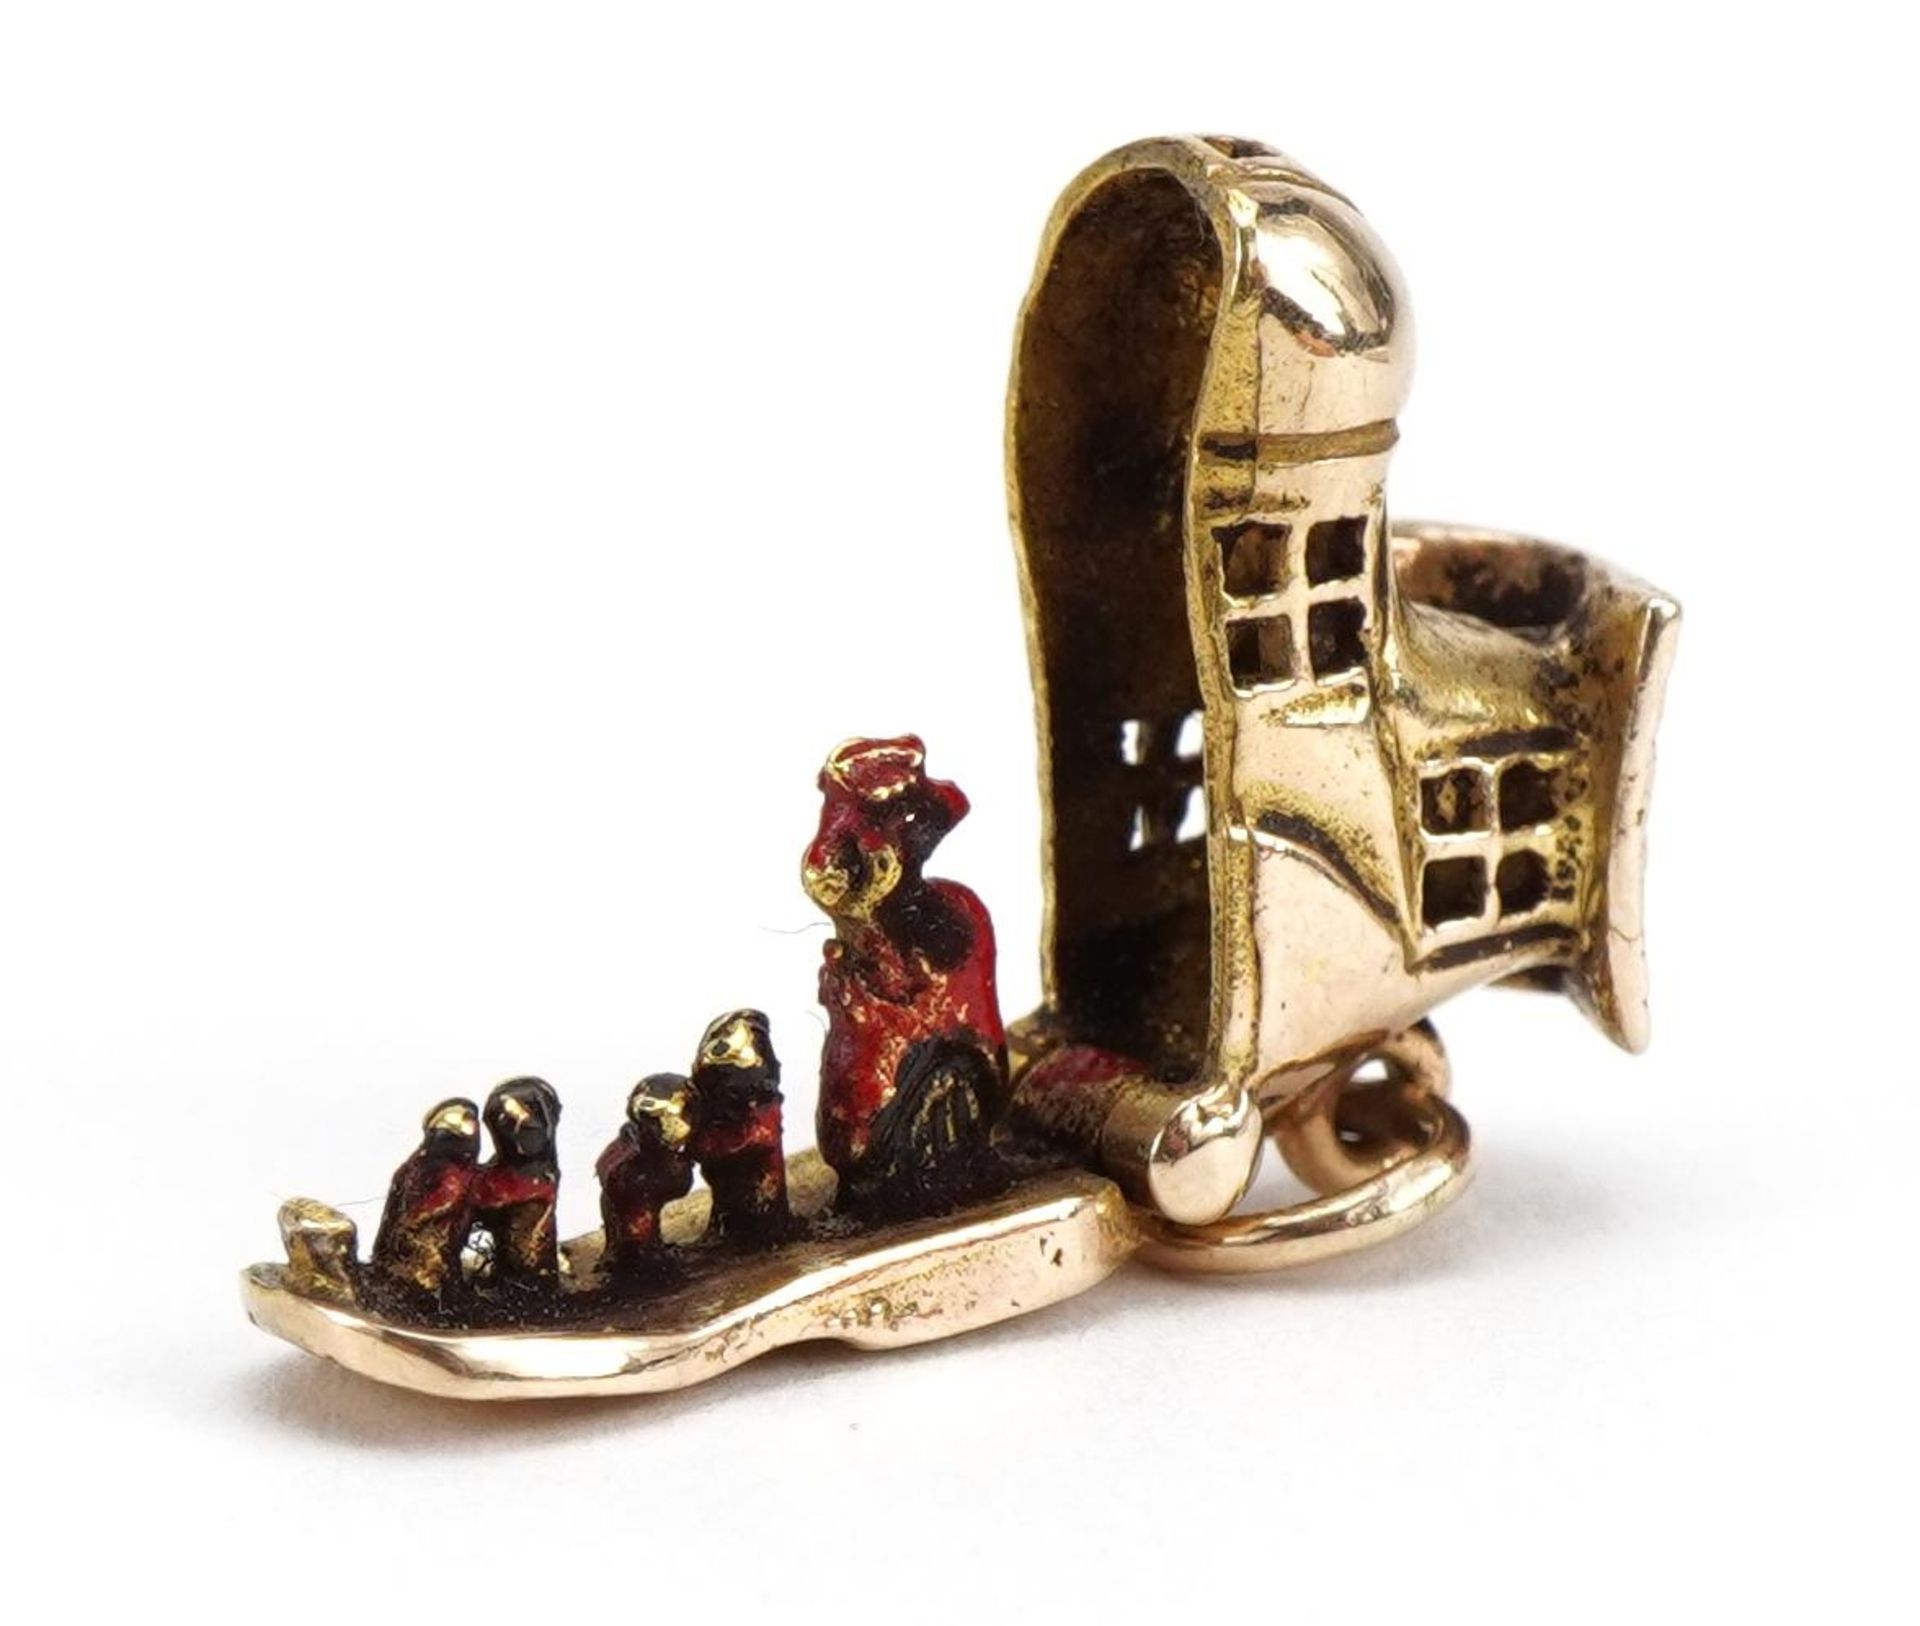 9ct gold shoe charm opening to reveal enamelled figures, 1.5cm wide, 2.7g